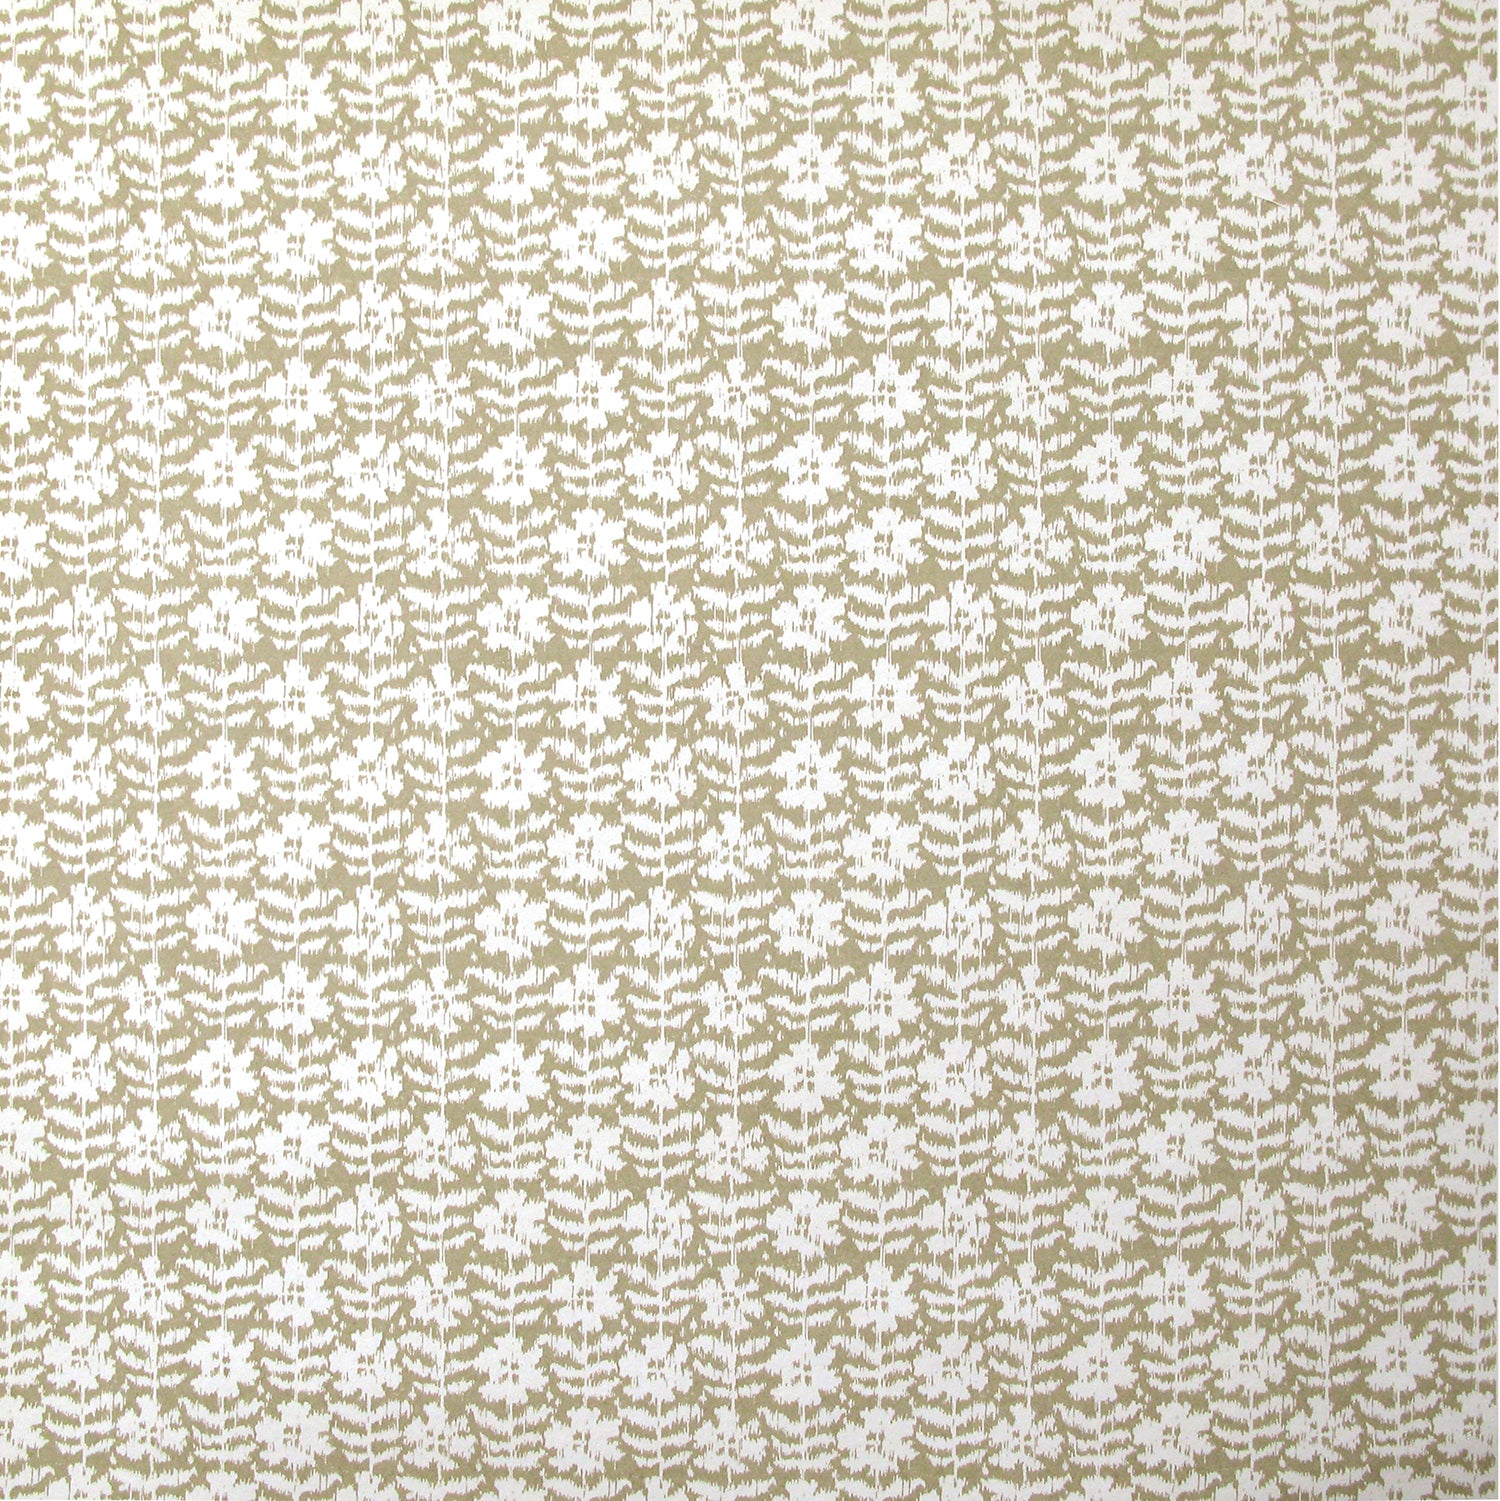 Detail of wallpaper in a floral grid print in white on a tan field.